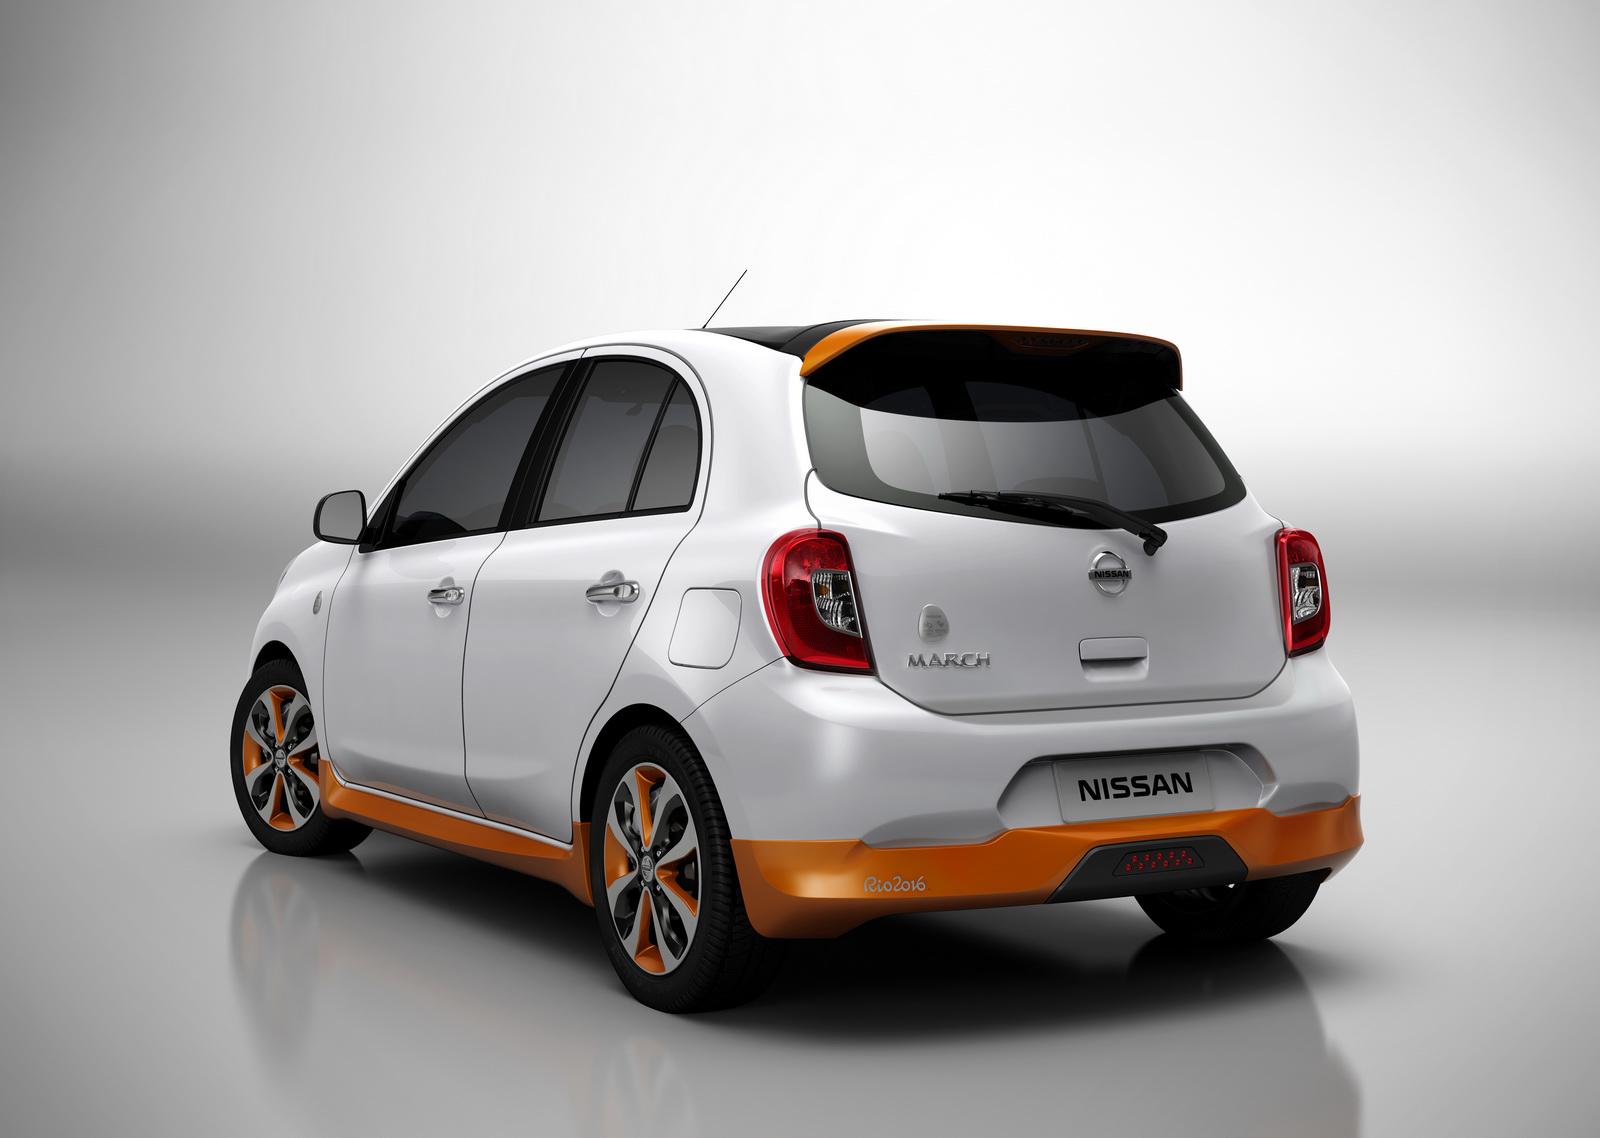  Nissan  March  Rio 2022 Edition Is a Micra with a Gold Body  